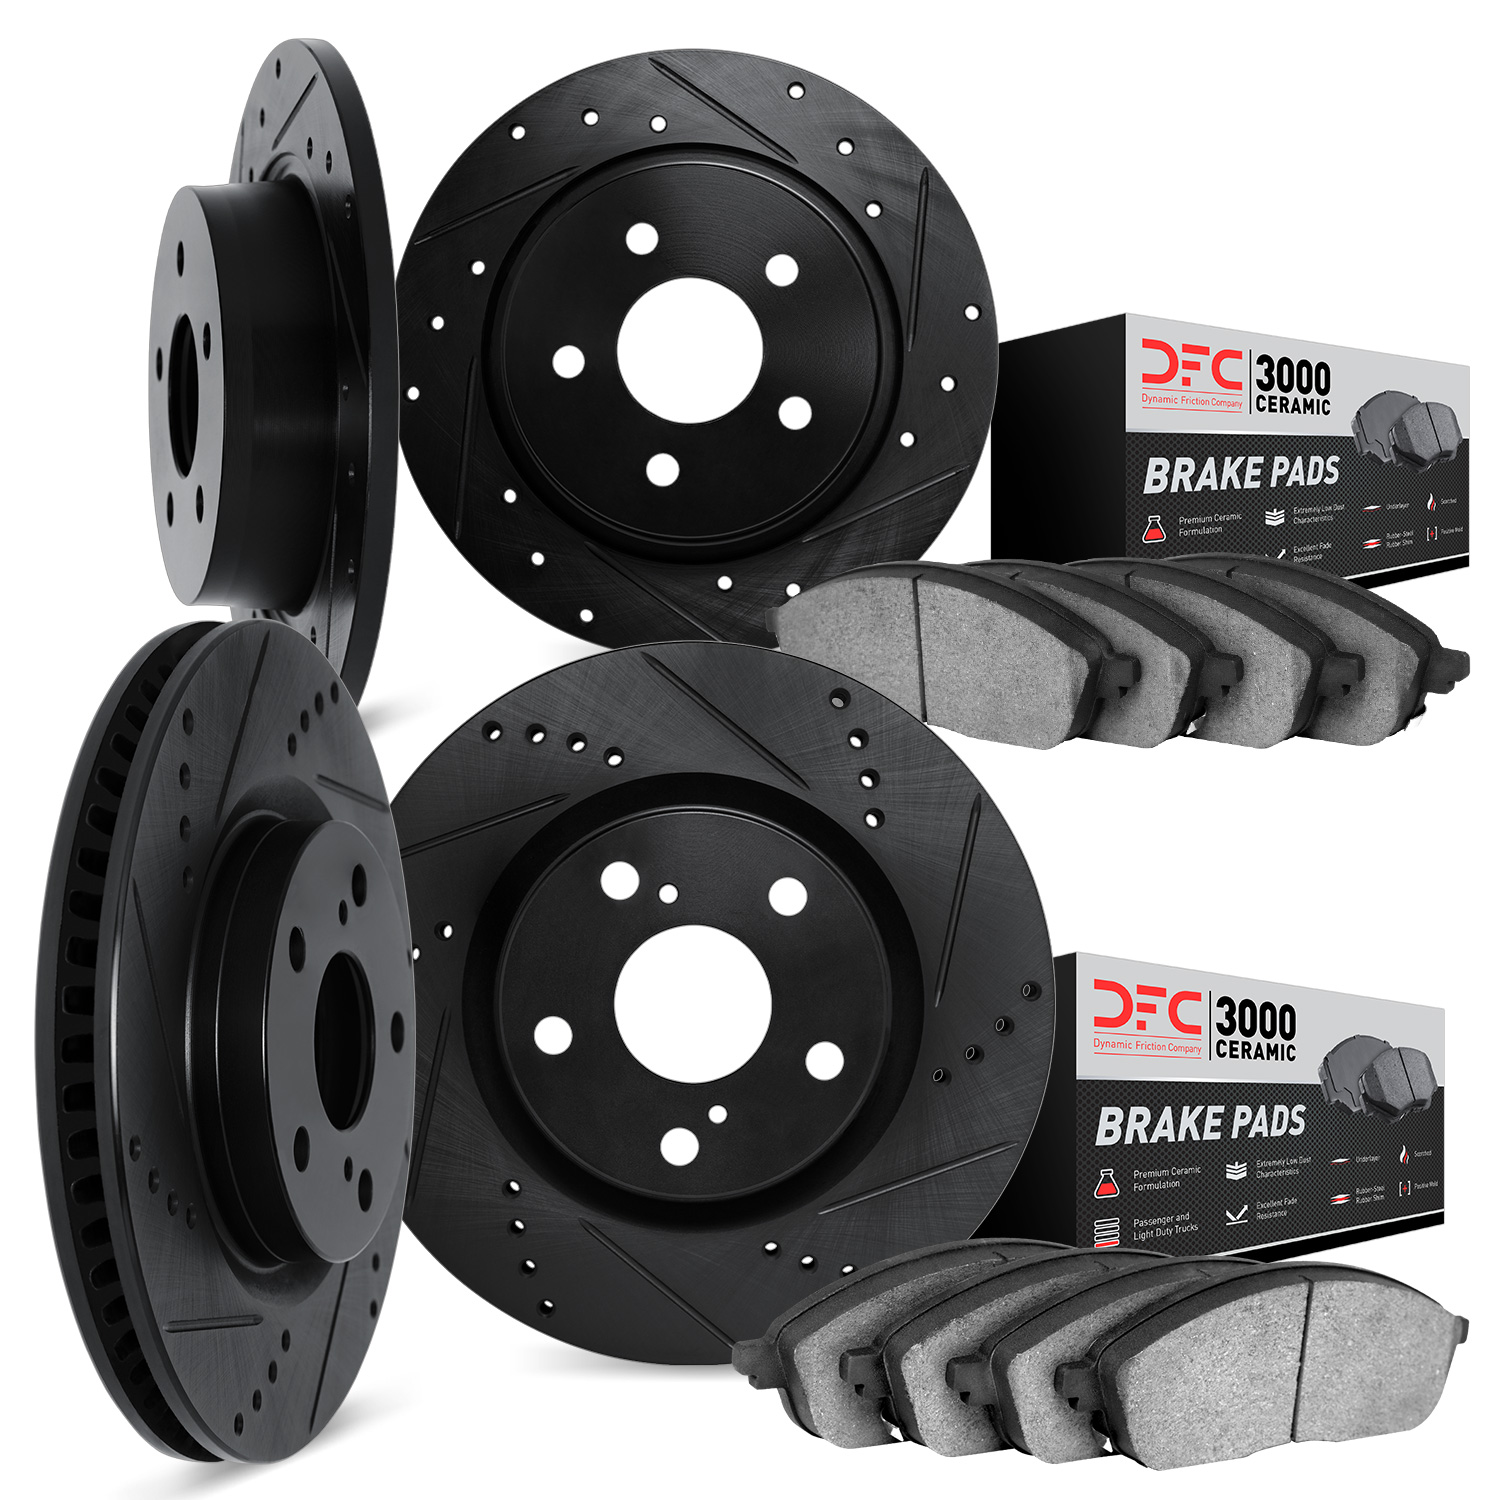 8304-59053 Drilled/Slotted Brake Rotors with 3000-Series Ceramic Brake Pads Kit [Black], 1999-2003 Acura/Honda, Position: Front